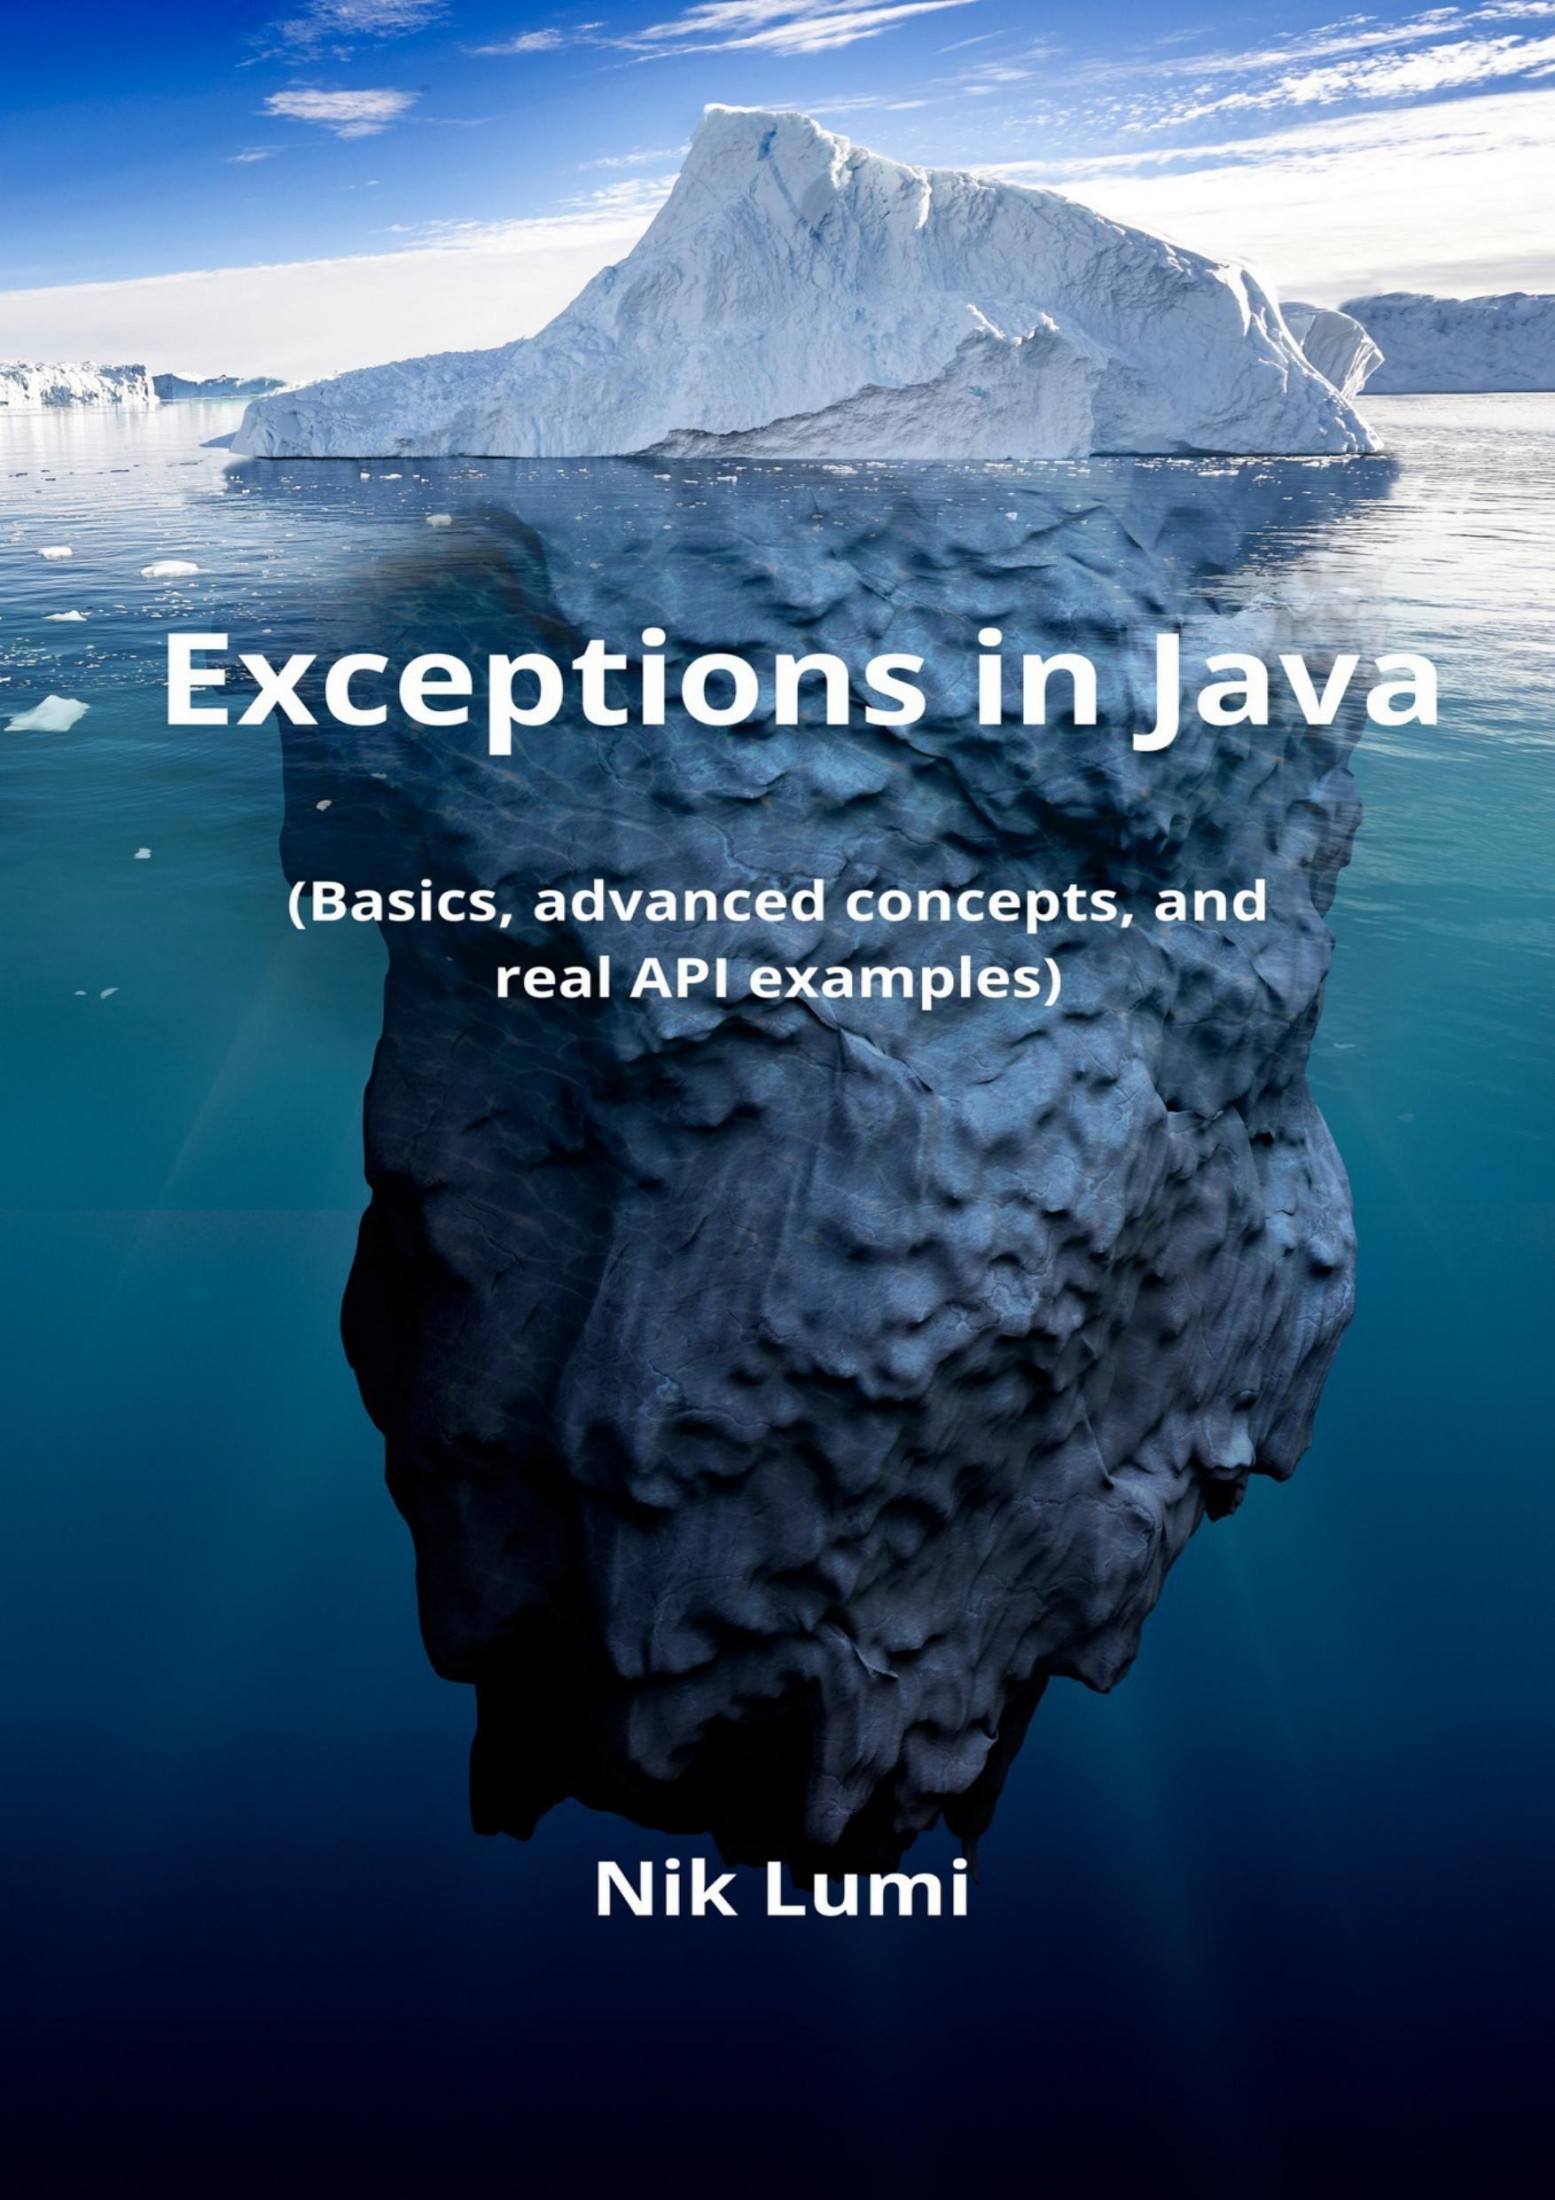 Exceptions in Java: Basics, advanced concepts, and real API examples